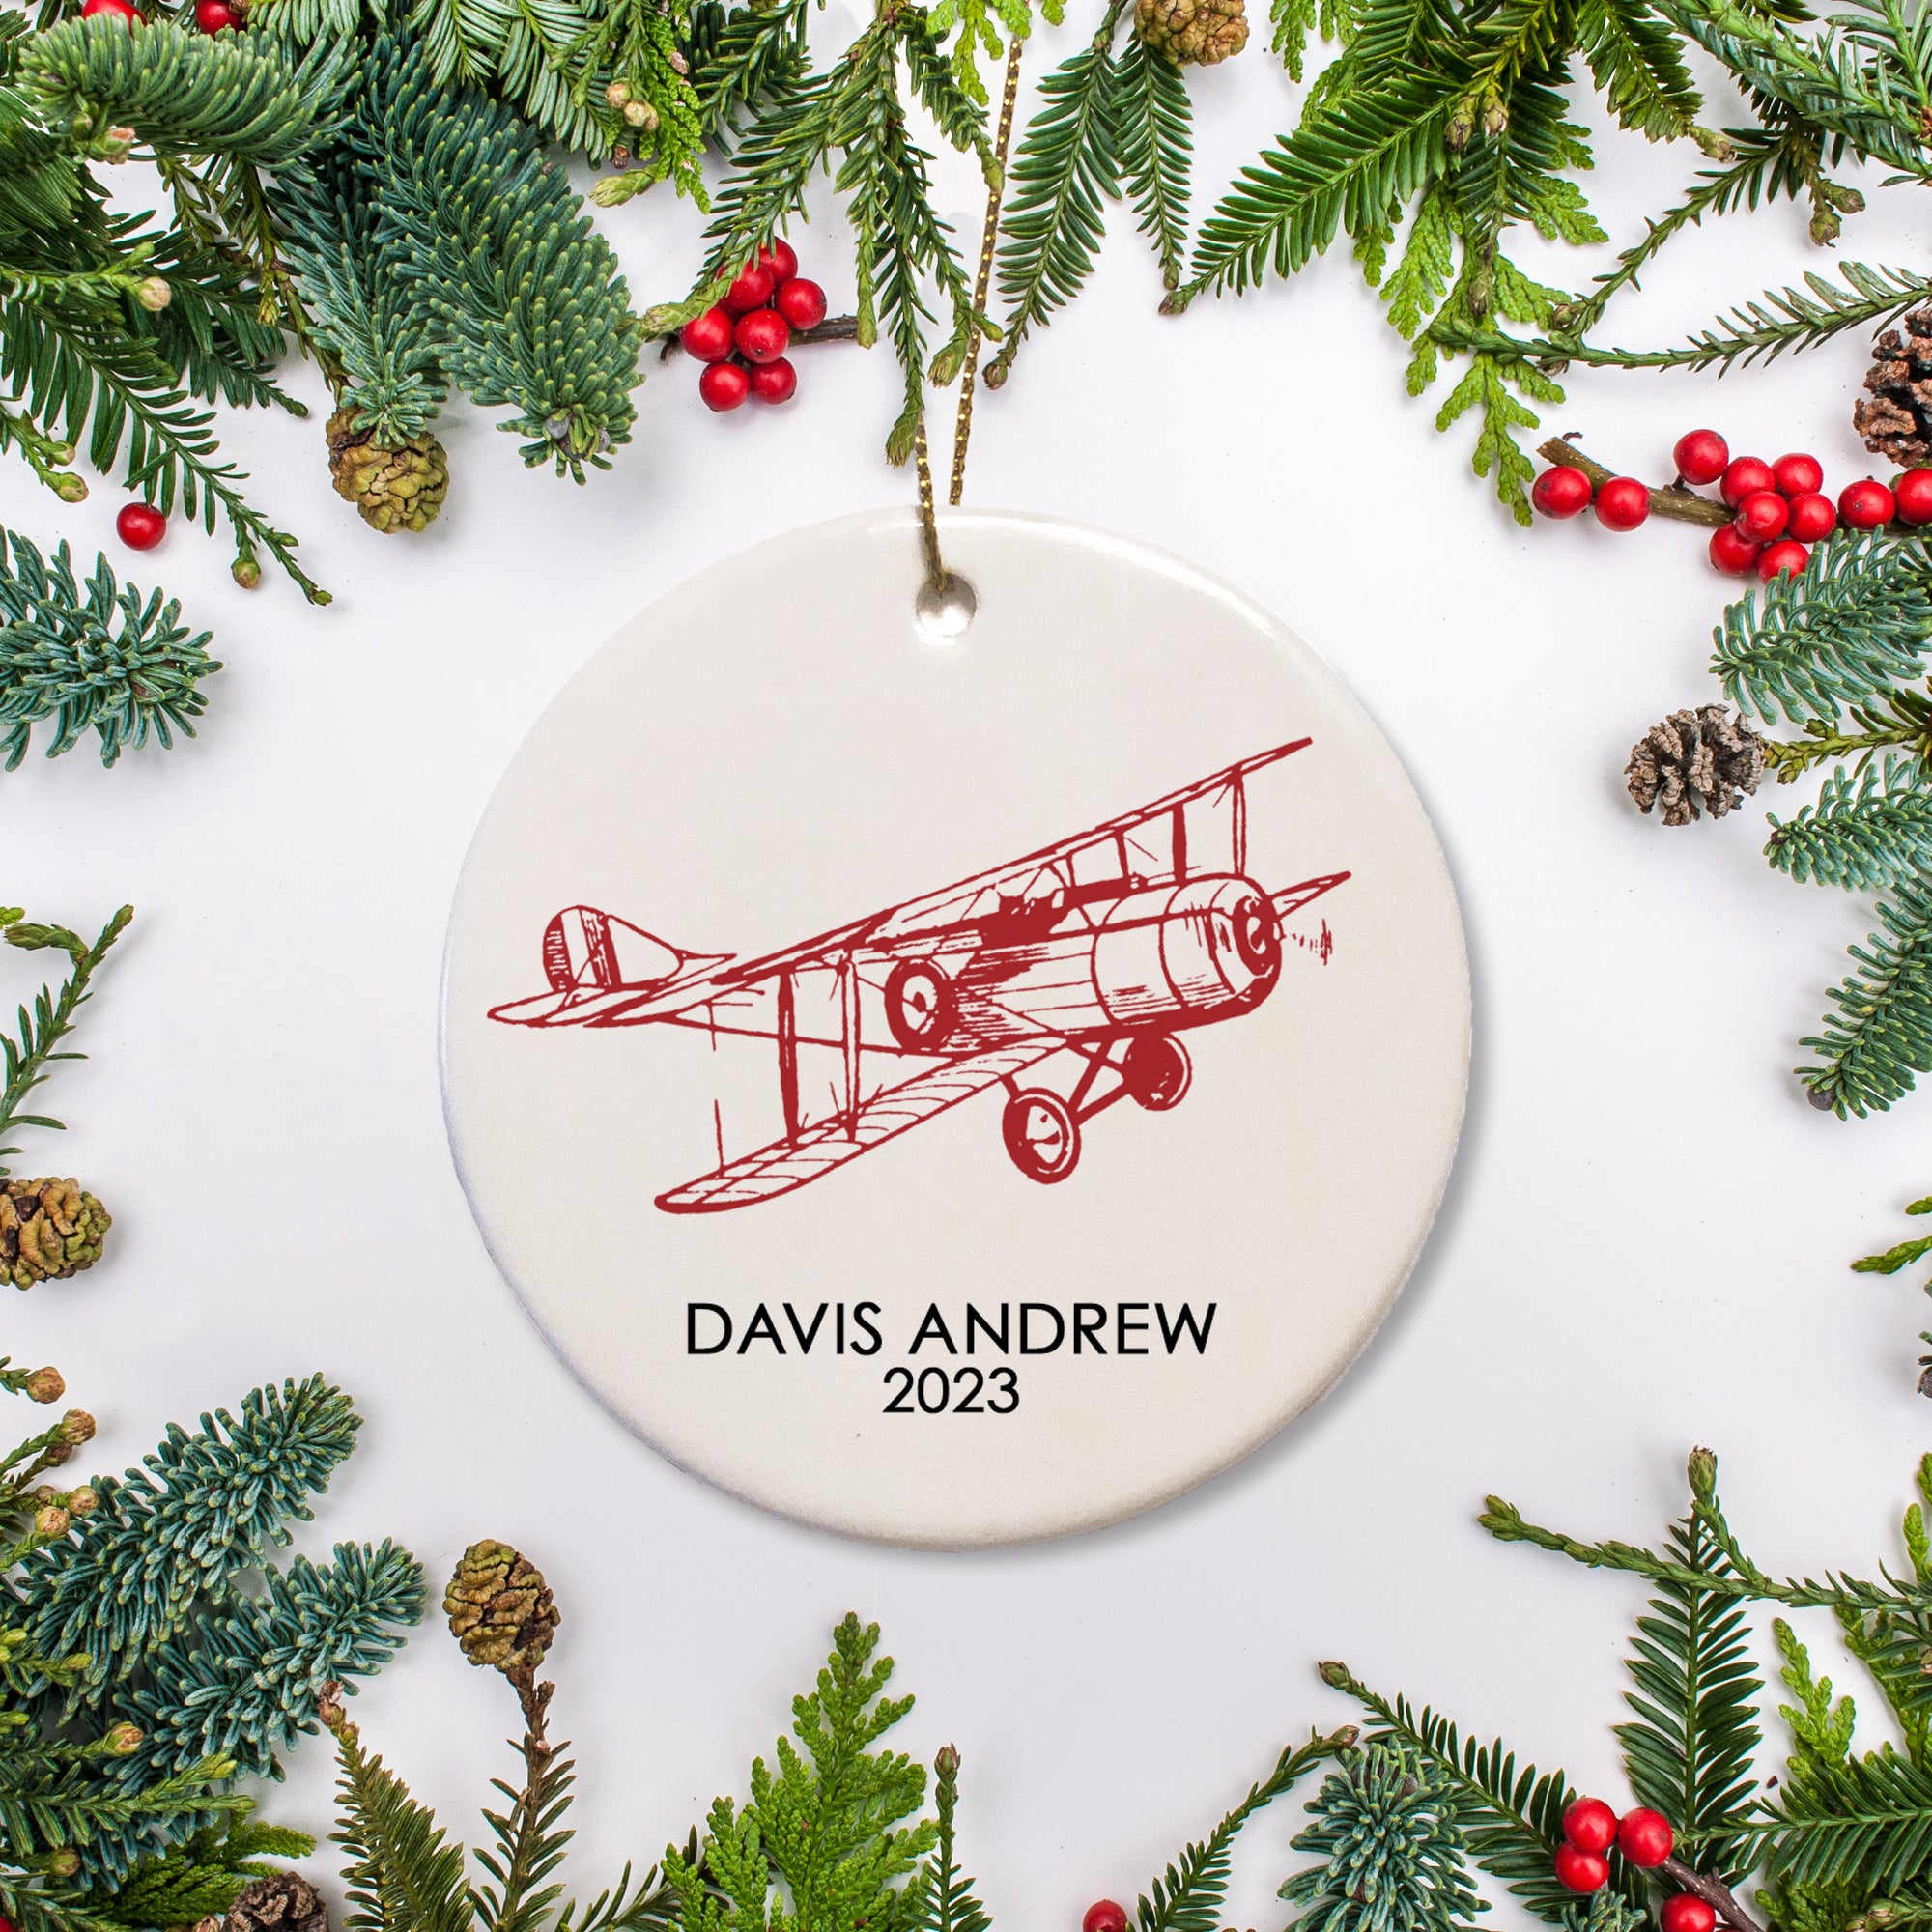 Vintage Airplane Personalized Christmas ornament sketched in red with name and year of your choice. Comes with gold string for hanging | PIPSY.COM